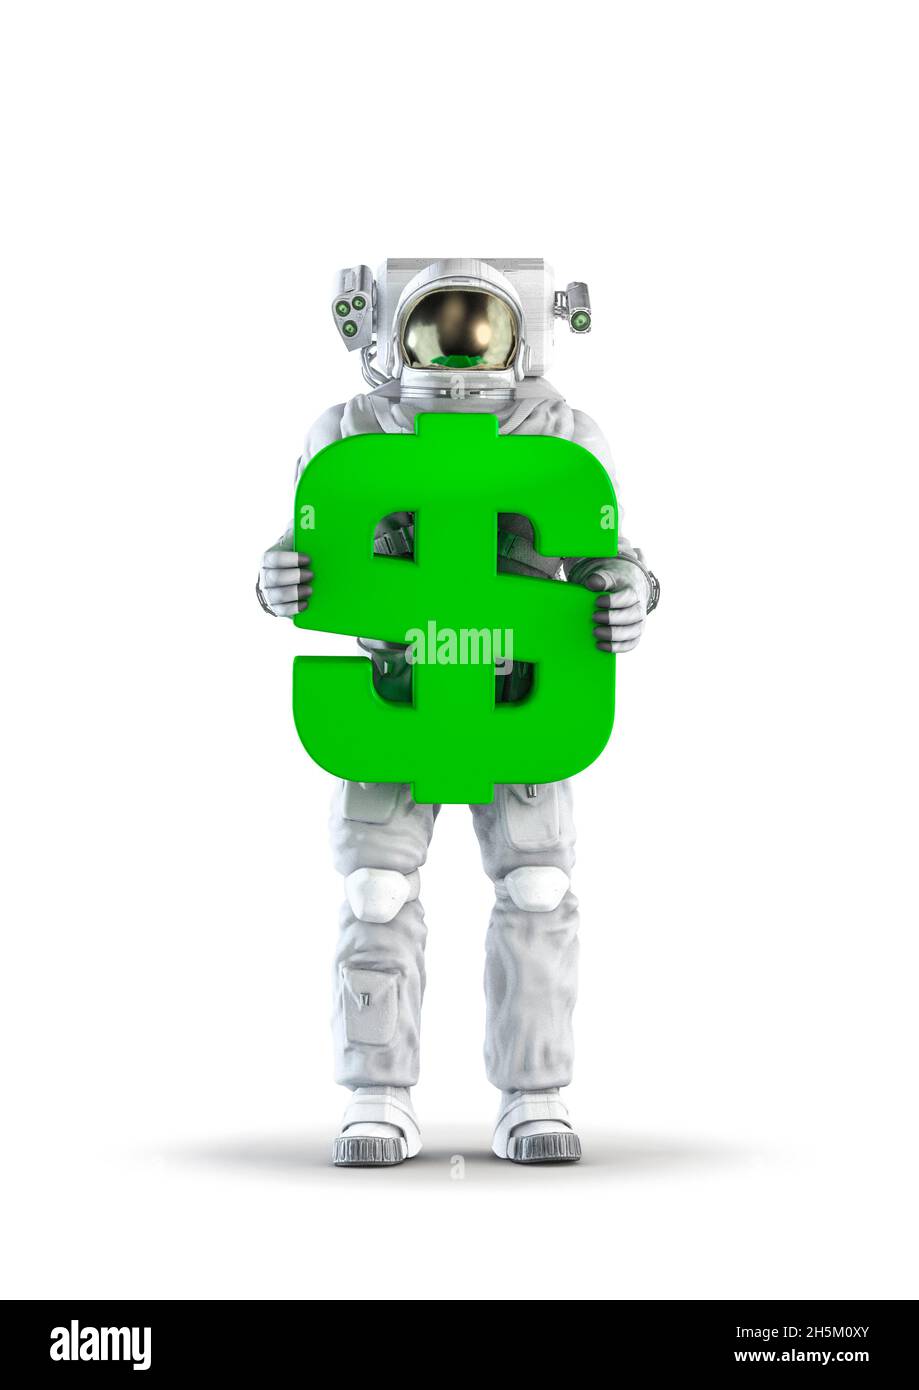 Dollar symbol astronaut - 3D illustration of space suit wearing male figure holding green USA currency symbol isolated on white studio background Stock Photo